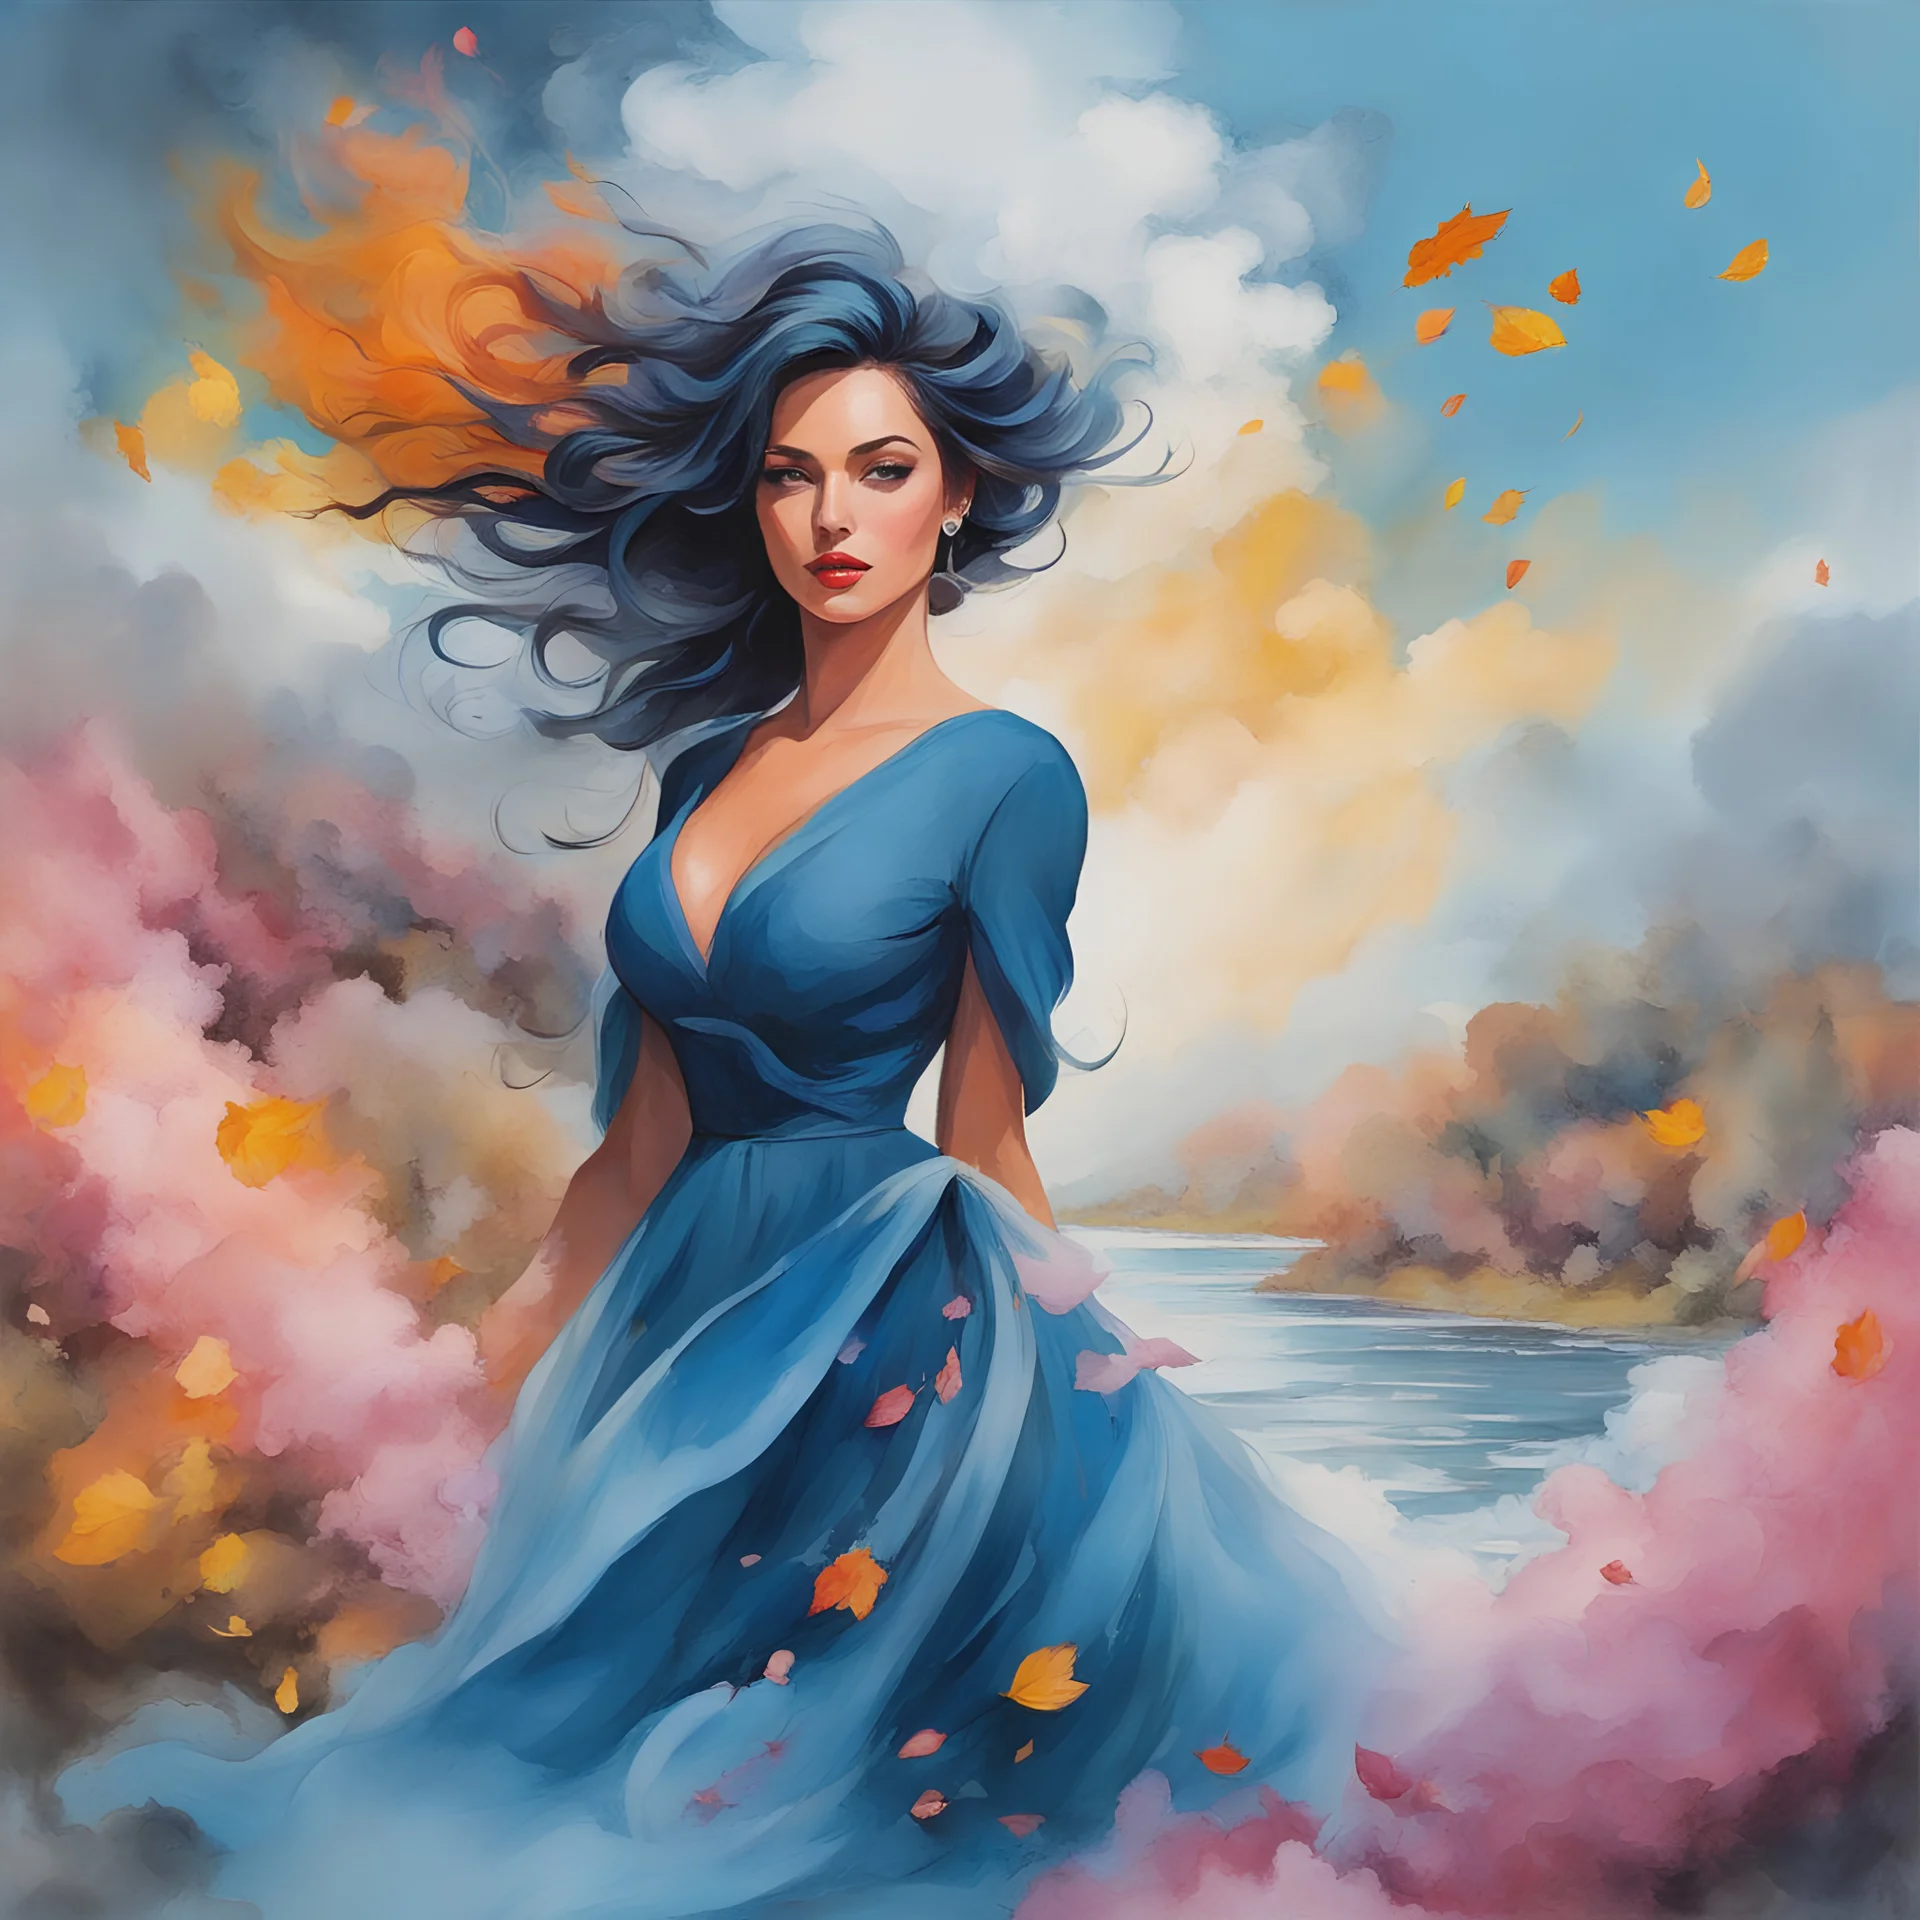 Pretty woman in windblowing blue hair awalks down the river filled with colorful smoke. The dress swirls like a cloud of smoke. oil painting illustration,"ink, splash art colored swirling smoke, leaves and petals flying